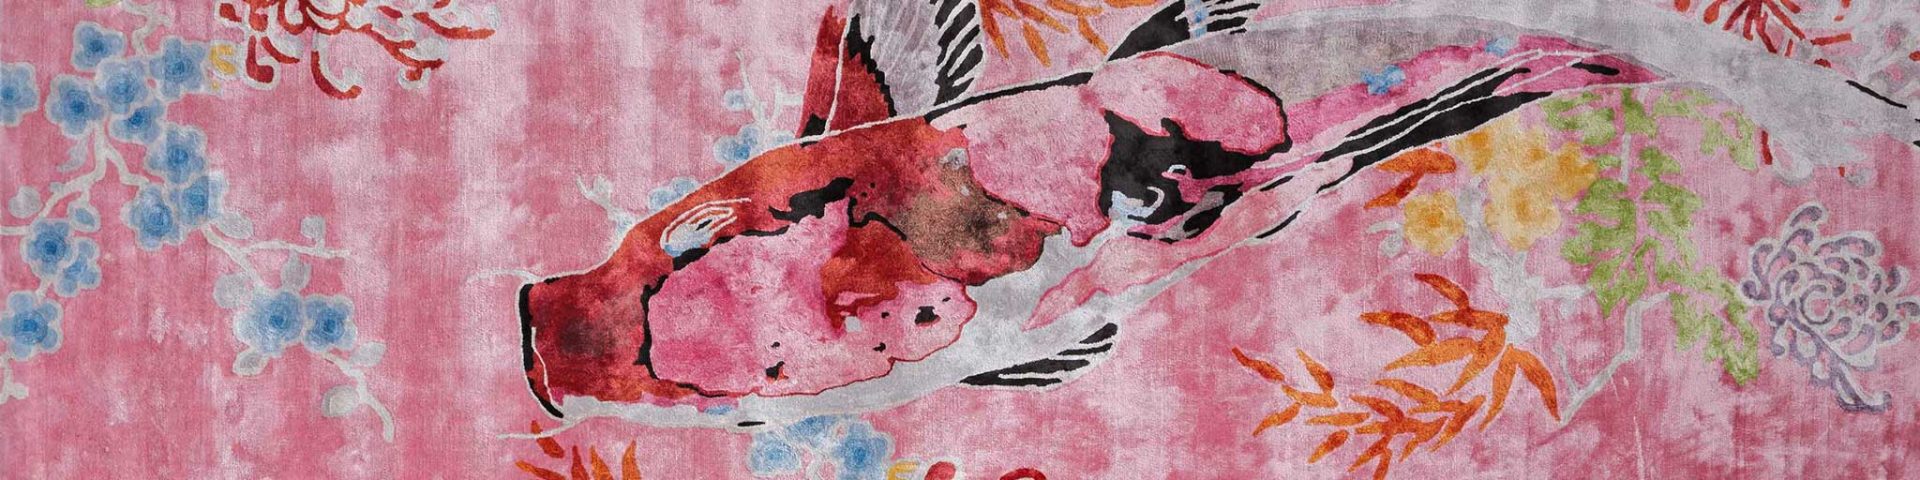 Koi 2 shown in colour Pink by Rug Star by Jürgen Dahlmanns - 100% viscose tufted in China. | Image courtesy of Rug Star.